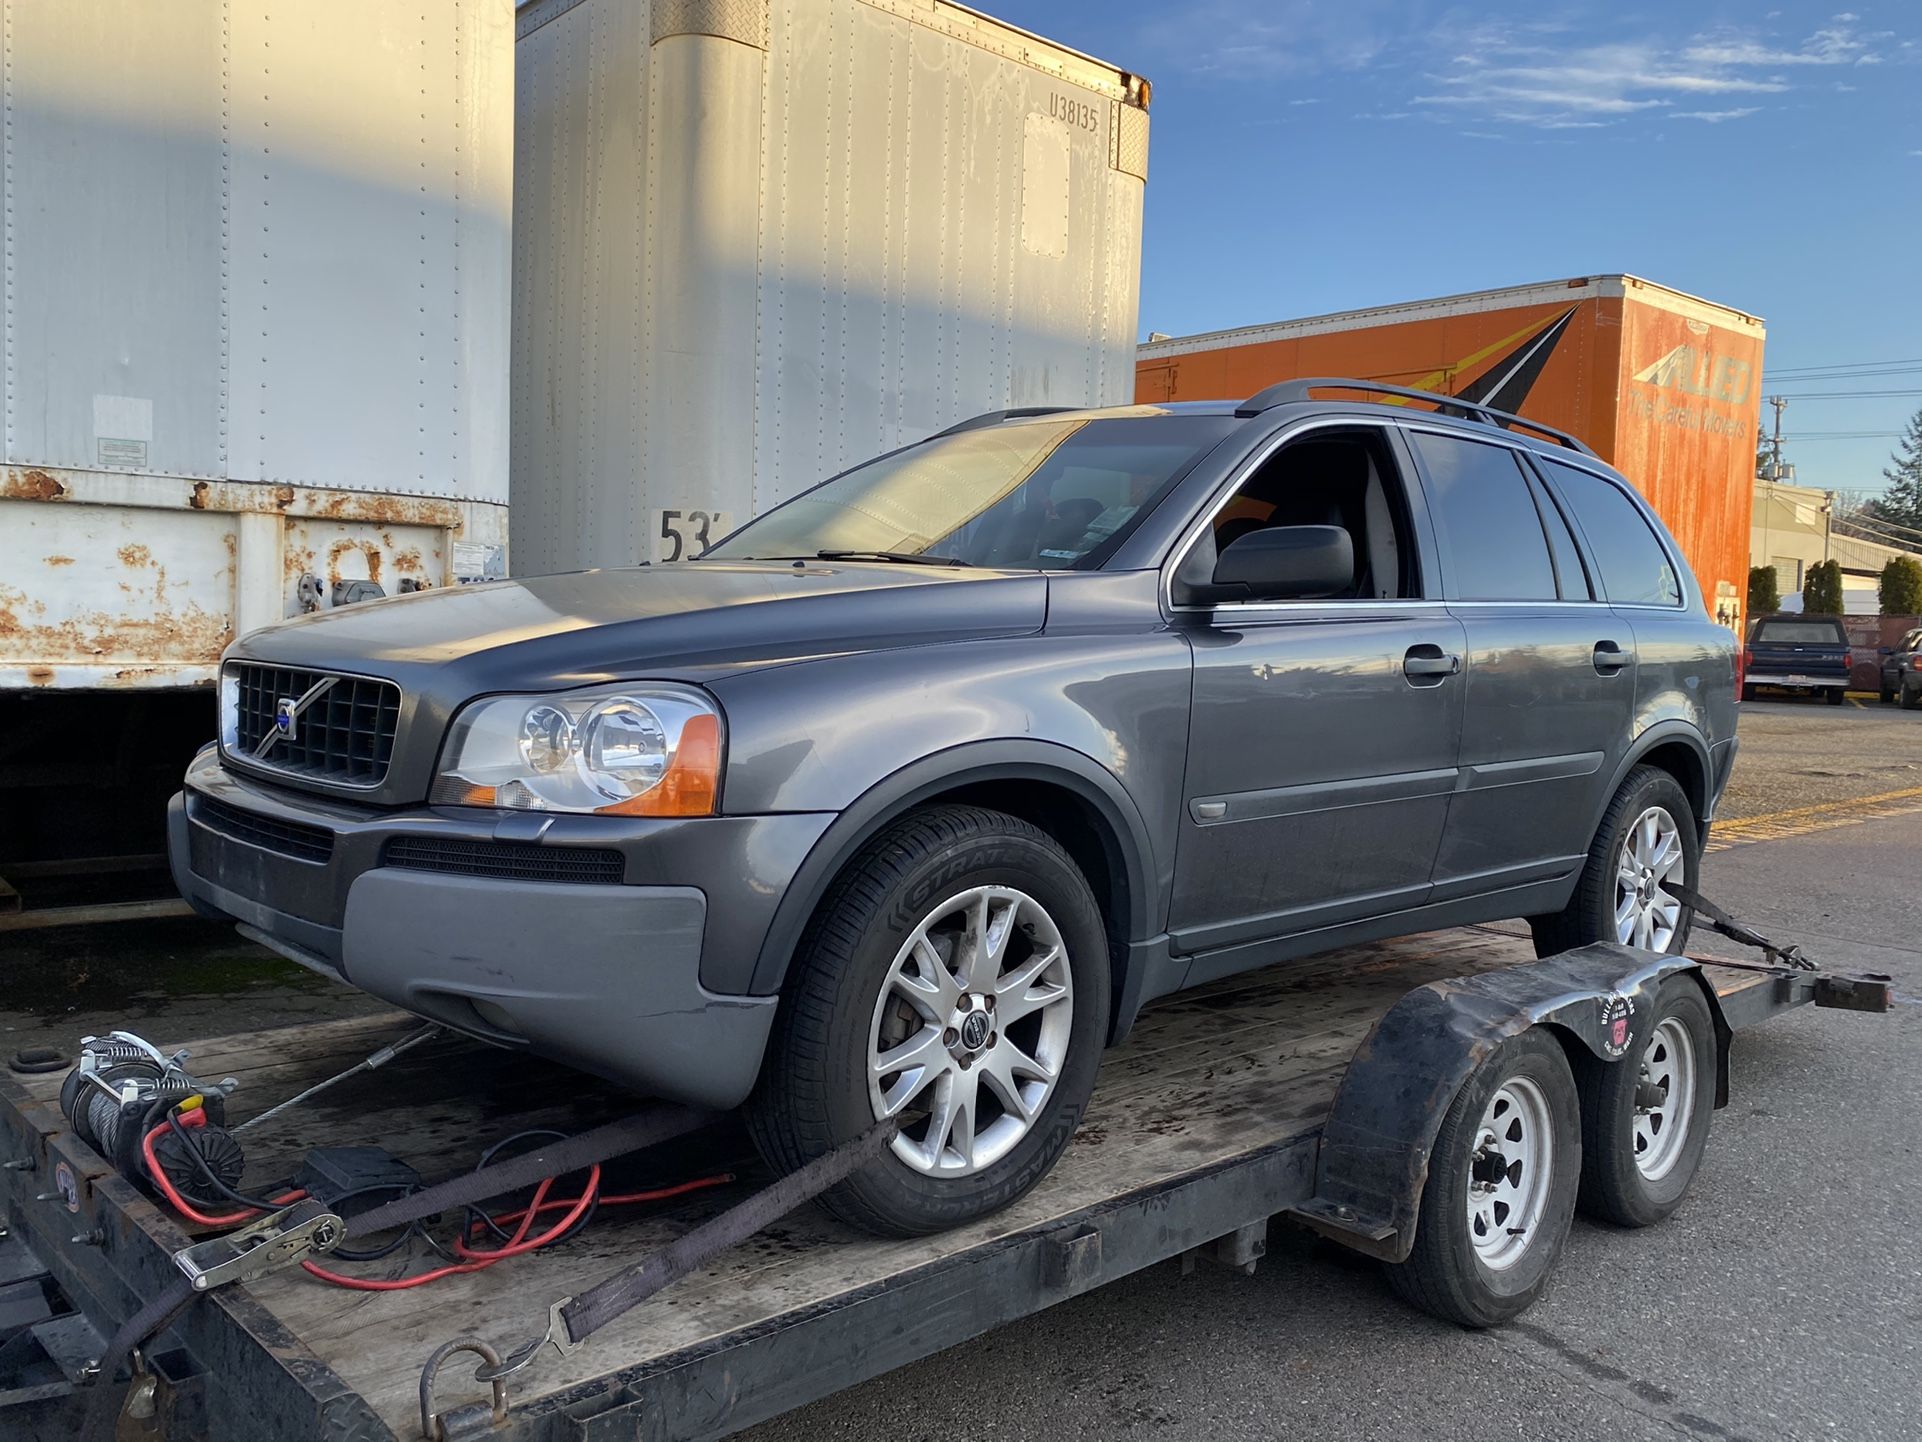 PARTING OUT - Volvo XC90 Parts